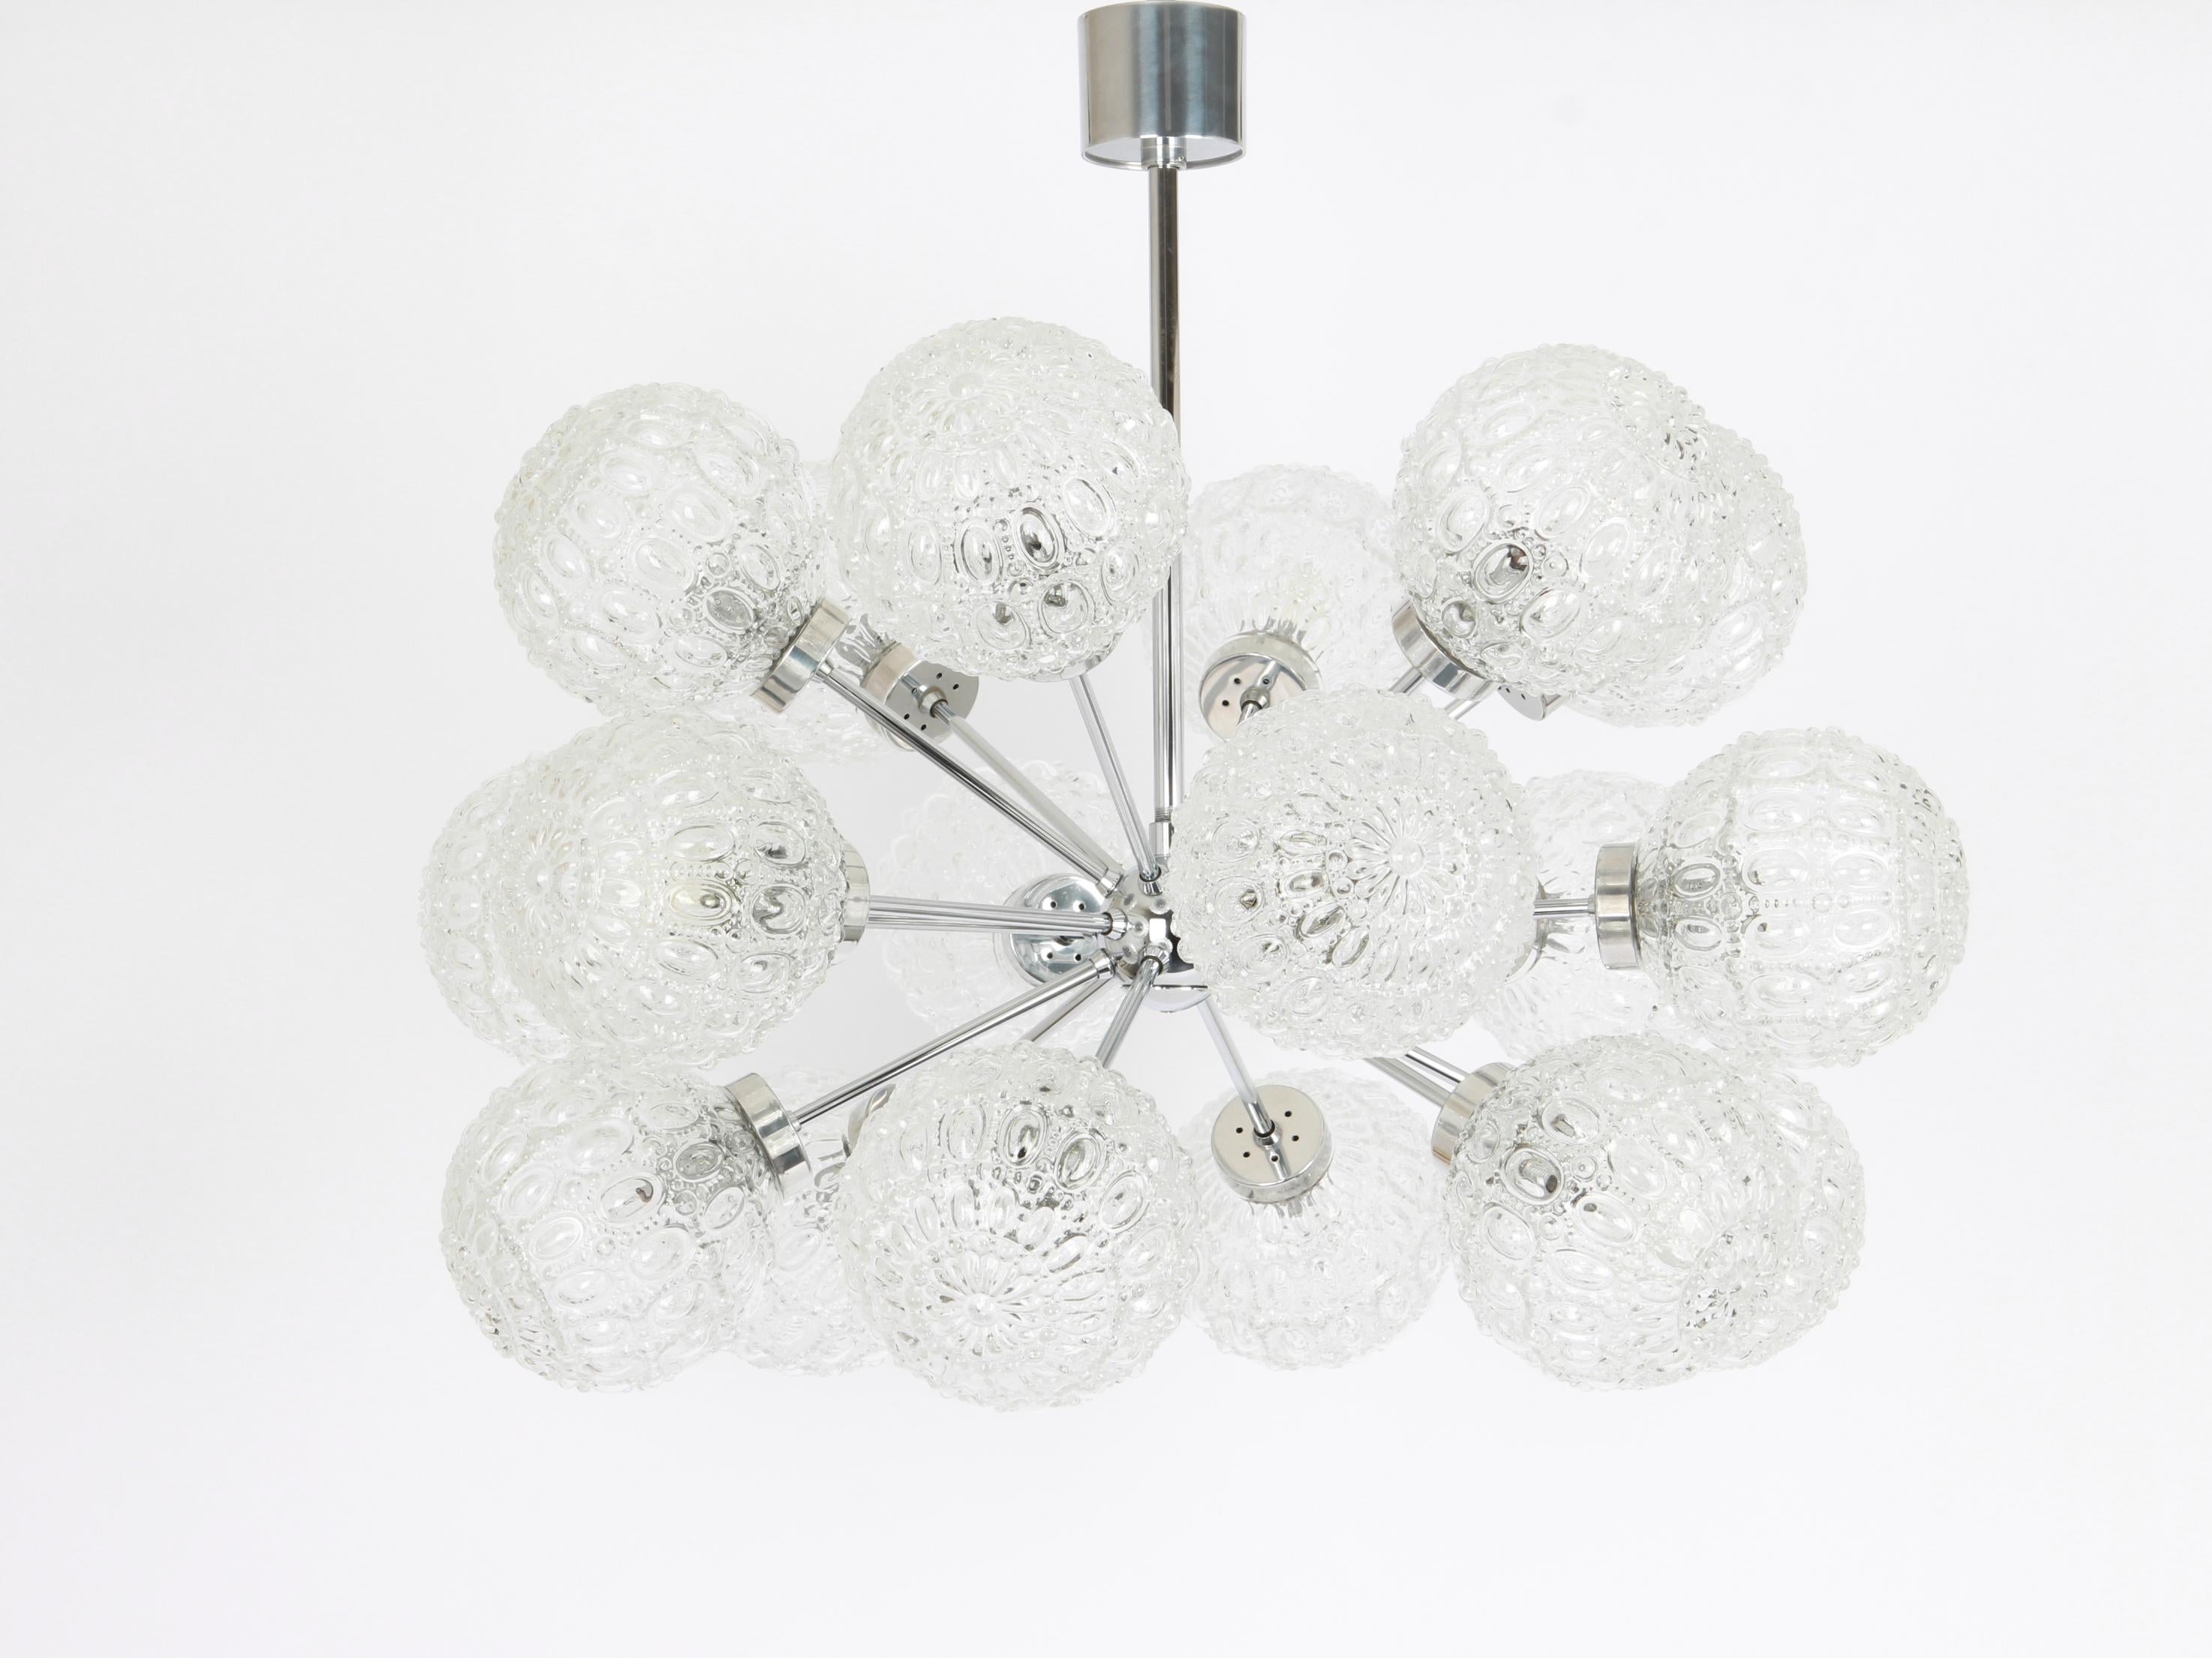 Stunning 18-arm Sputnik chandelier with 18 glass shades by Richard Essig, Germany, 1960s
Dimensions
Height
26.7 in.- (68 cm)
Diameter
25.6 in. (65 cm)
It needs 18 candelabra size bulbs up to 40 watts each.Light bulbs are not included. It is